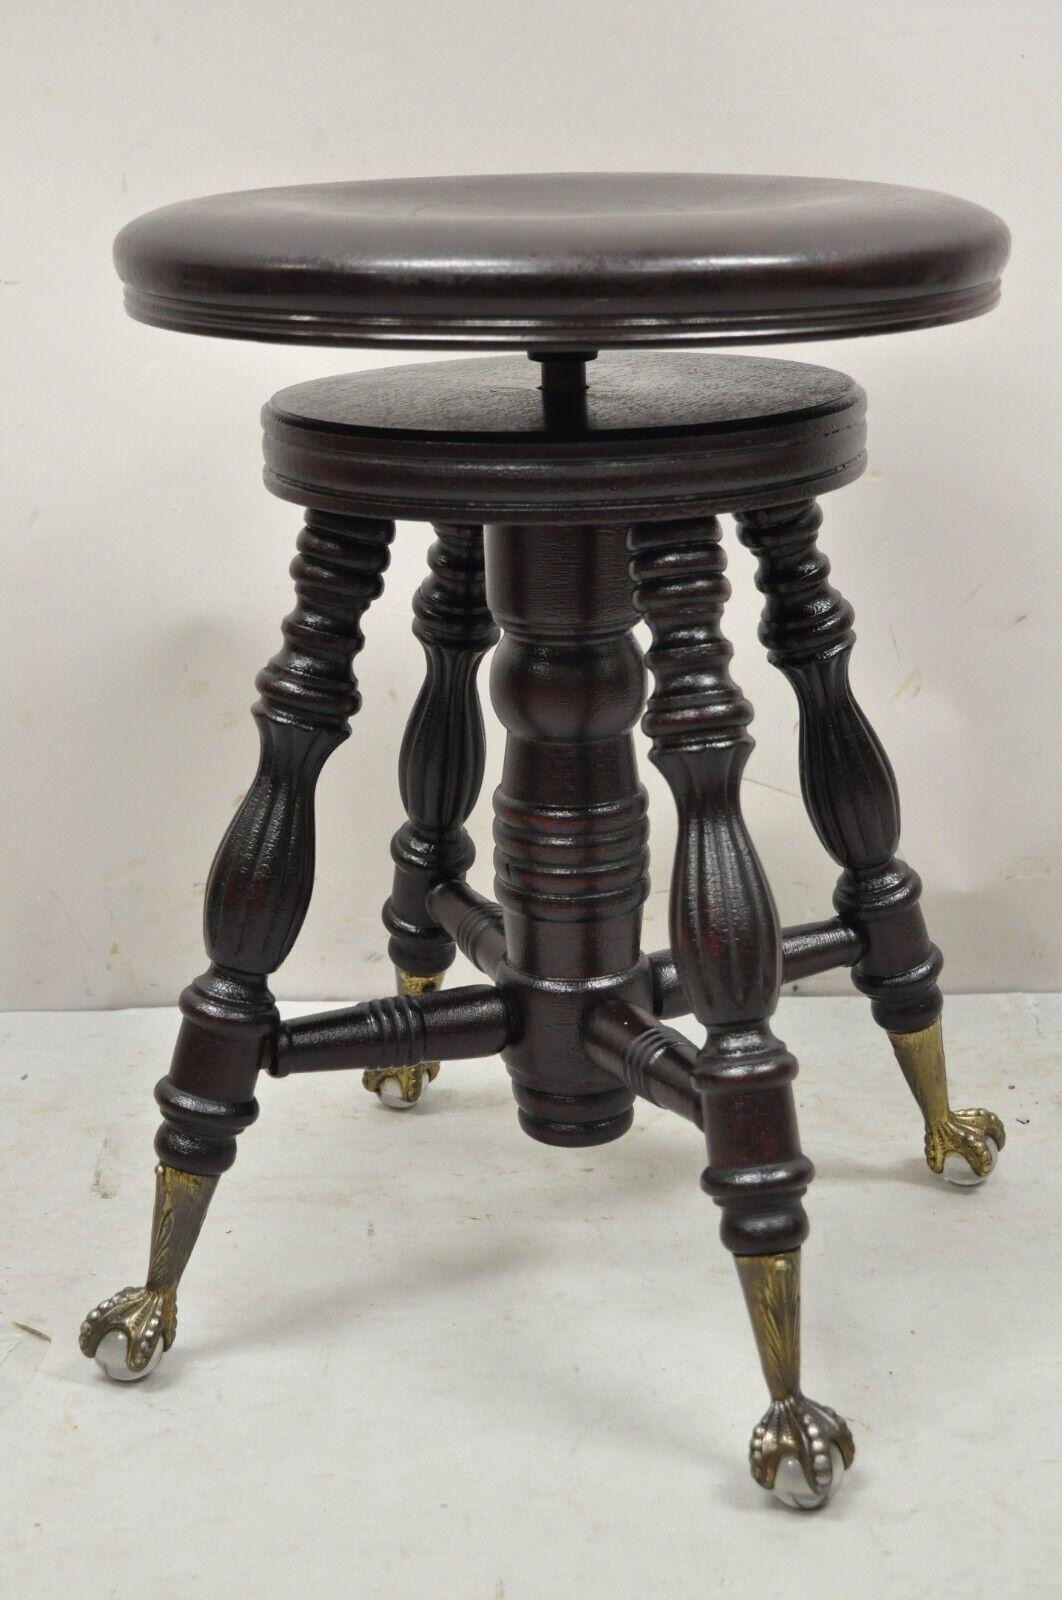 Antique A. Merrian Co Victorian piano stool glass ball brass claw feet. Item features glass ball feet, turn carved stretcher base, solid wood construction, nicely carved details, very nice antique item. Circa 19th century. Measurements: 19.5